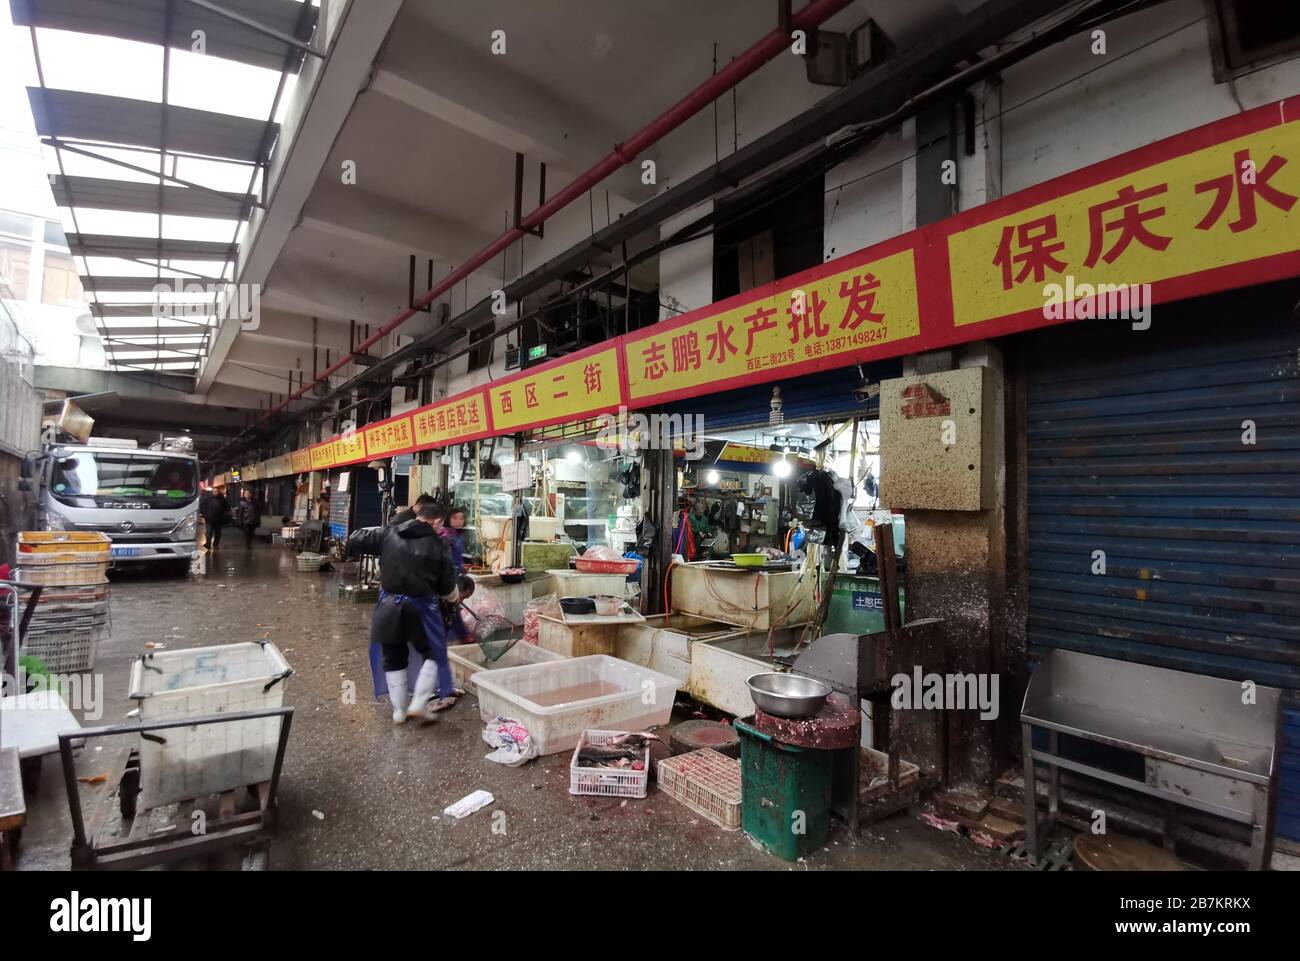 View of Wuhan Huanan Wholesale Seafood Market before its closure in Hankou, Wuhan city, central China's Hubei province, 31 December 2019. Stock Photo